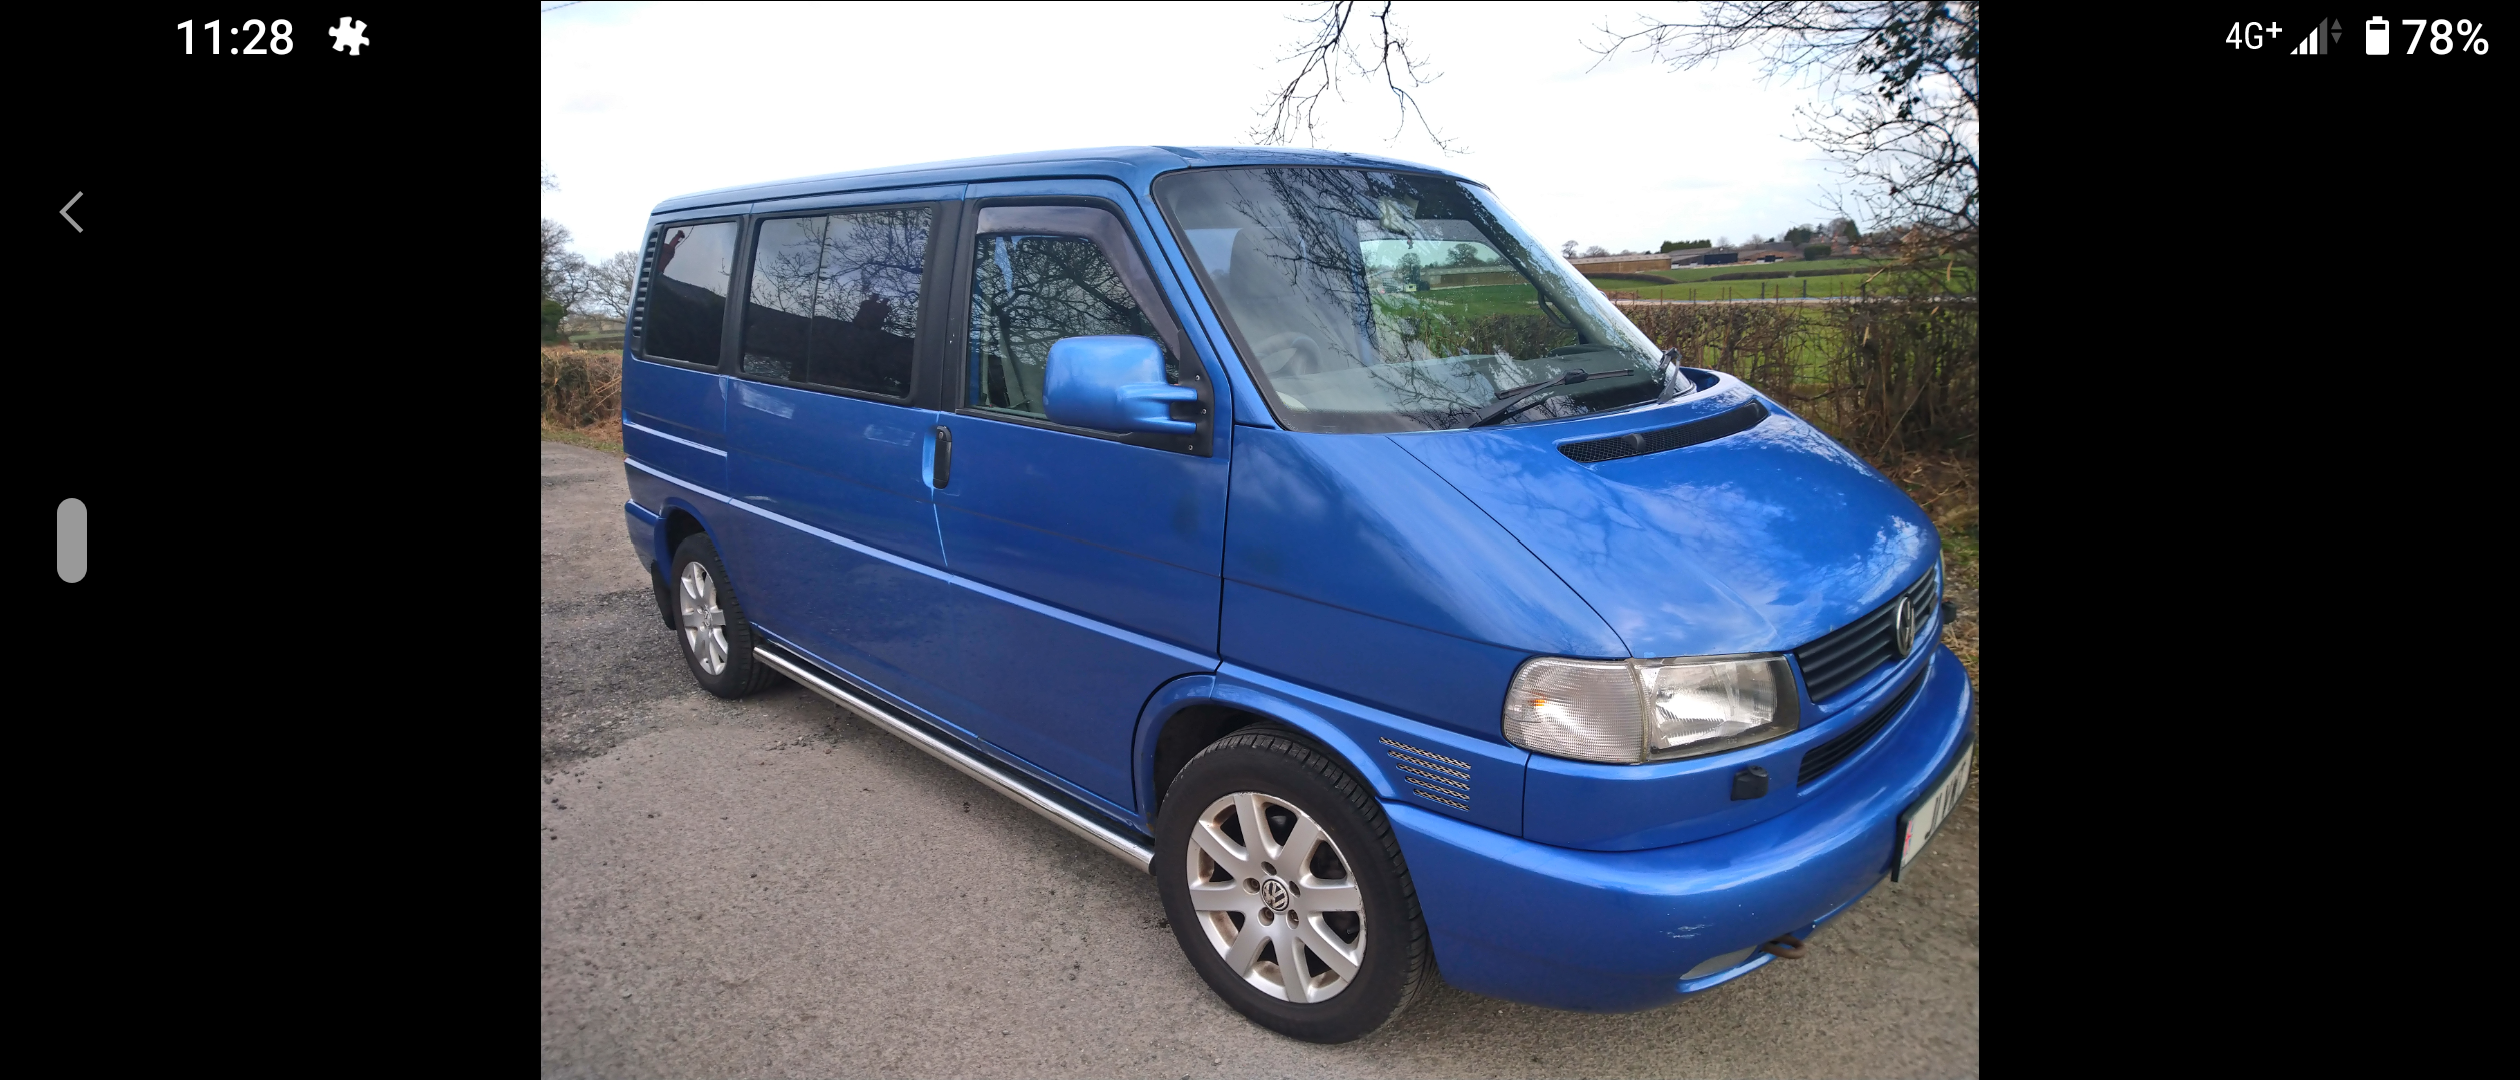 Rare T4 Multivan 2002, on private plate inc VWT, Blue, anyone interested call 07533348864 for details and pictures.